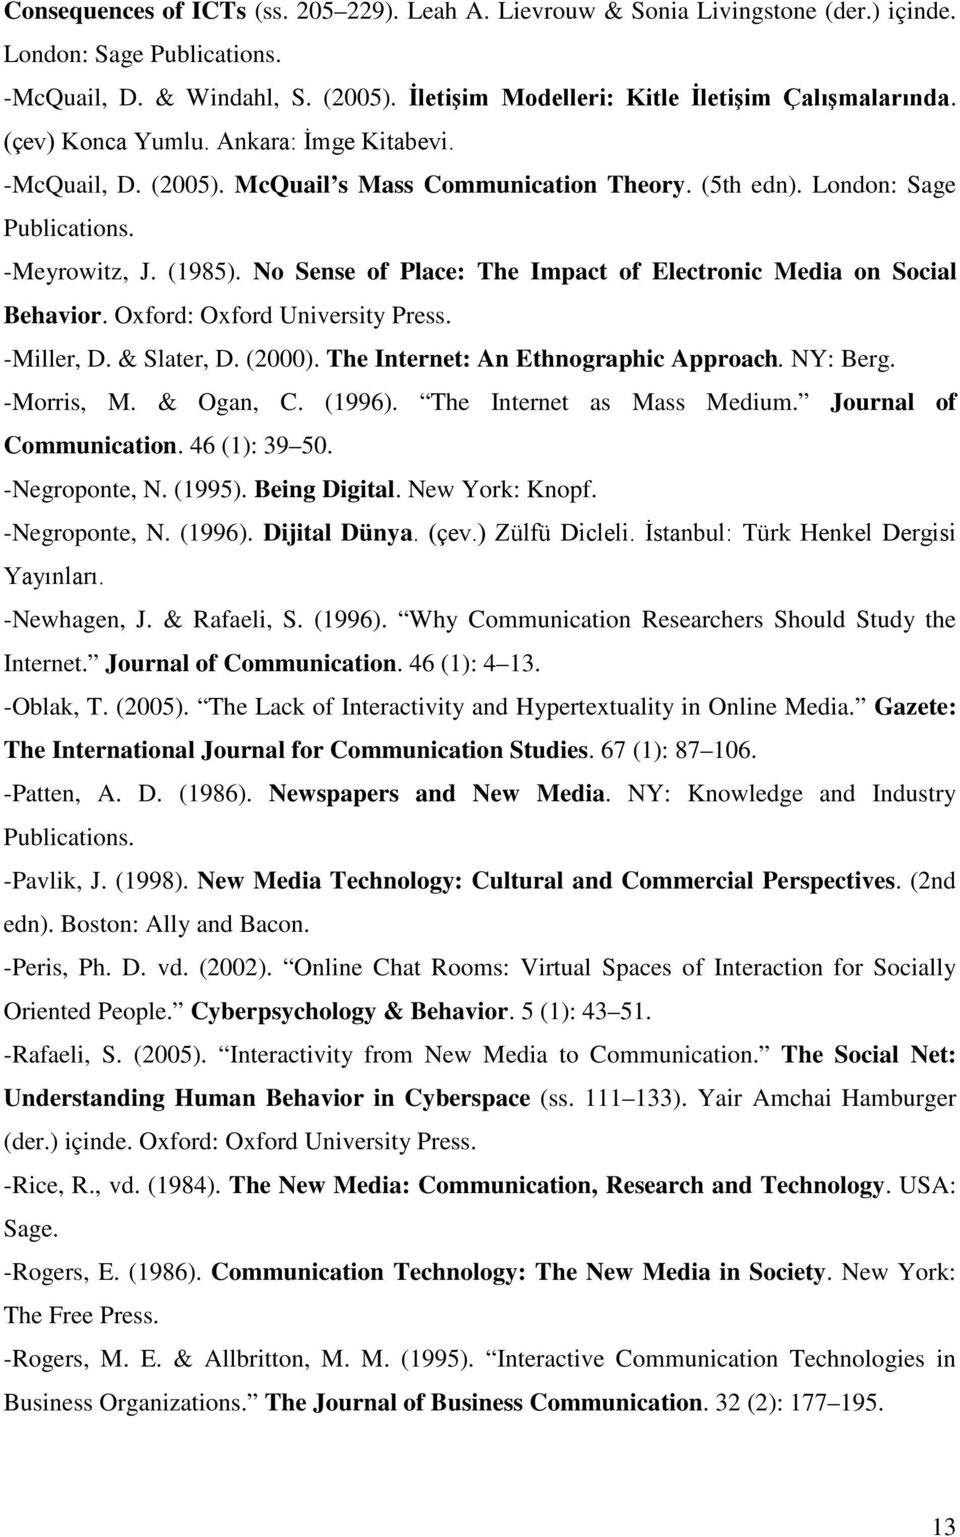 No Sense of Place: The Impact of Electronic Media on Social Behavior. Oxford: Oxford University Press. -Miller, D. & Slater, D. (2000). The Internet: An Ethnographic Approach. NY: Berg. -Morris, M.